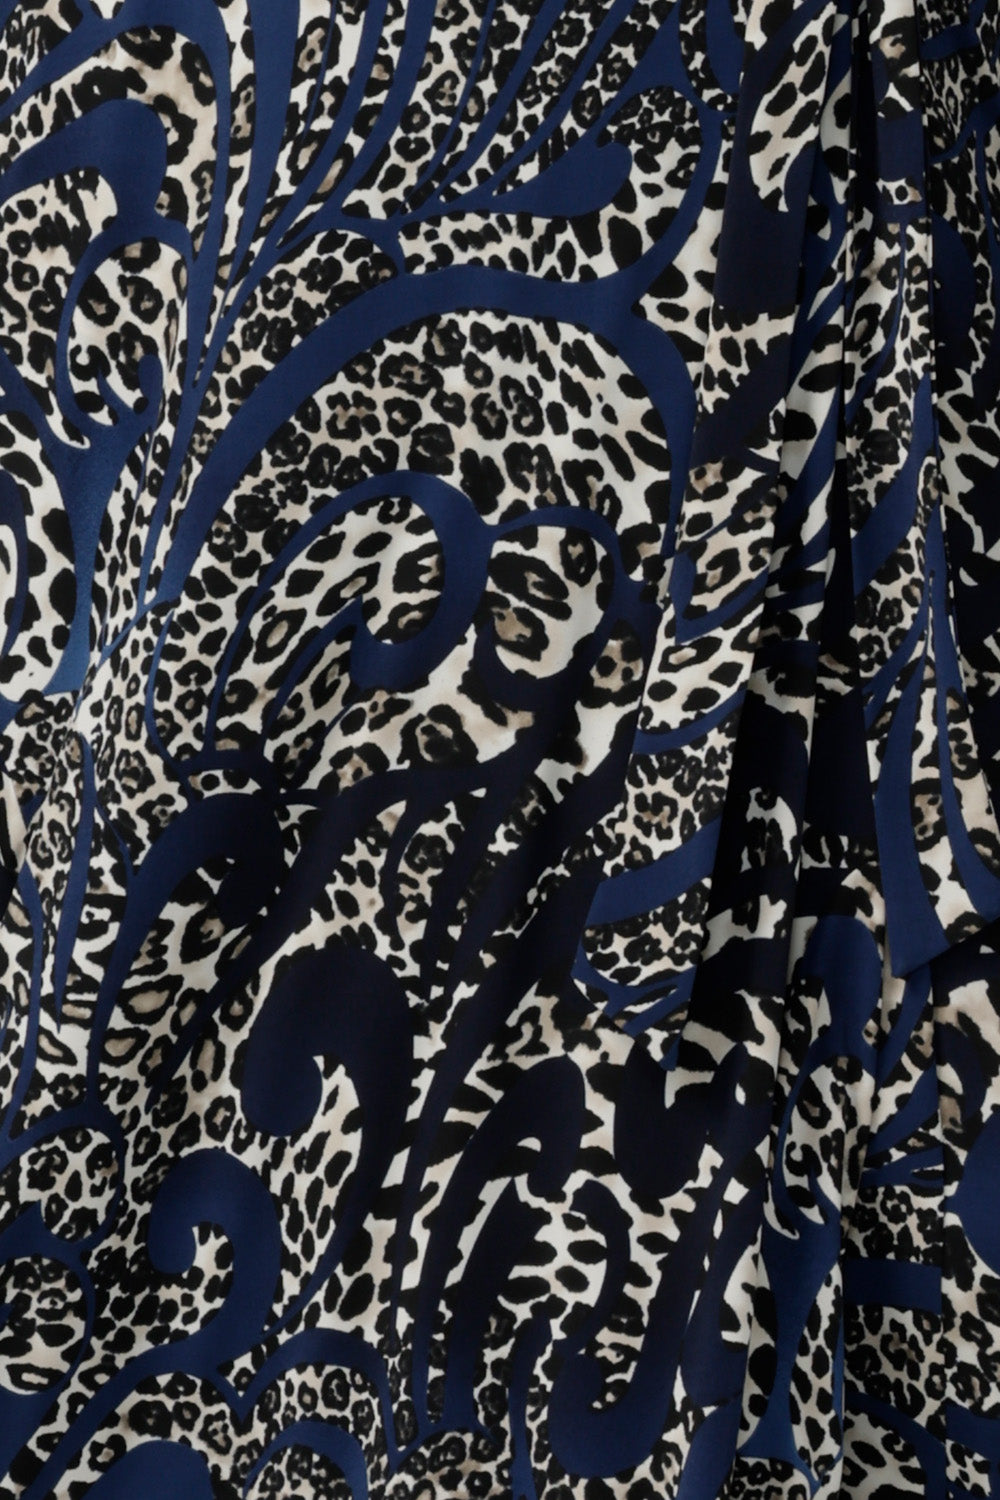 Swatch of an animal print jersey fabric on a navy base, used by Australian-made women's clothes brand, Leina & Fleur to make dresses, tops and pants in sizes 8-24.